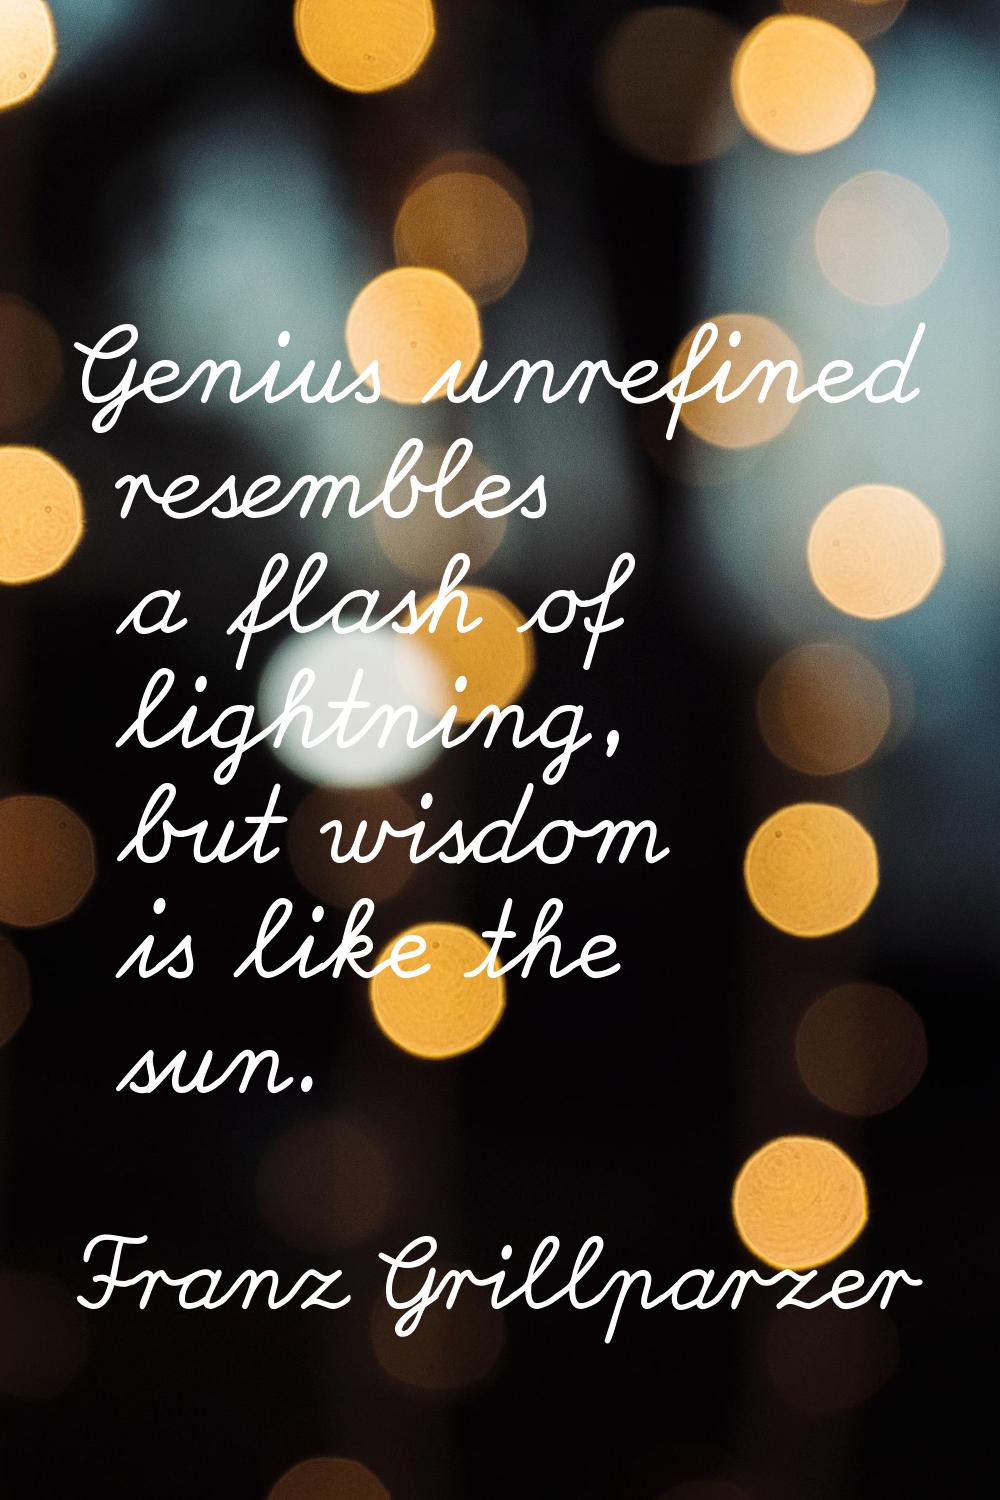 Genius unrefined resembles a flash of lightning, but wisdom is like the sun.